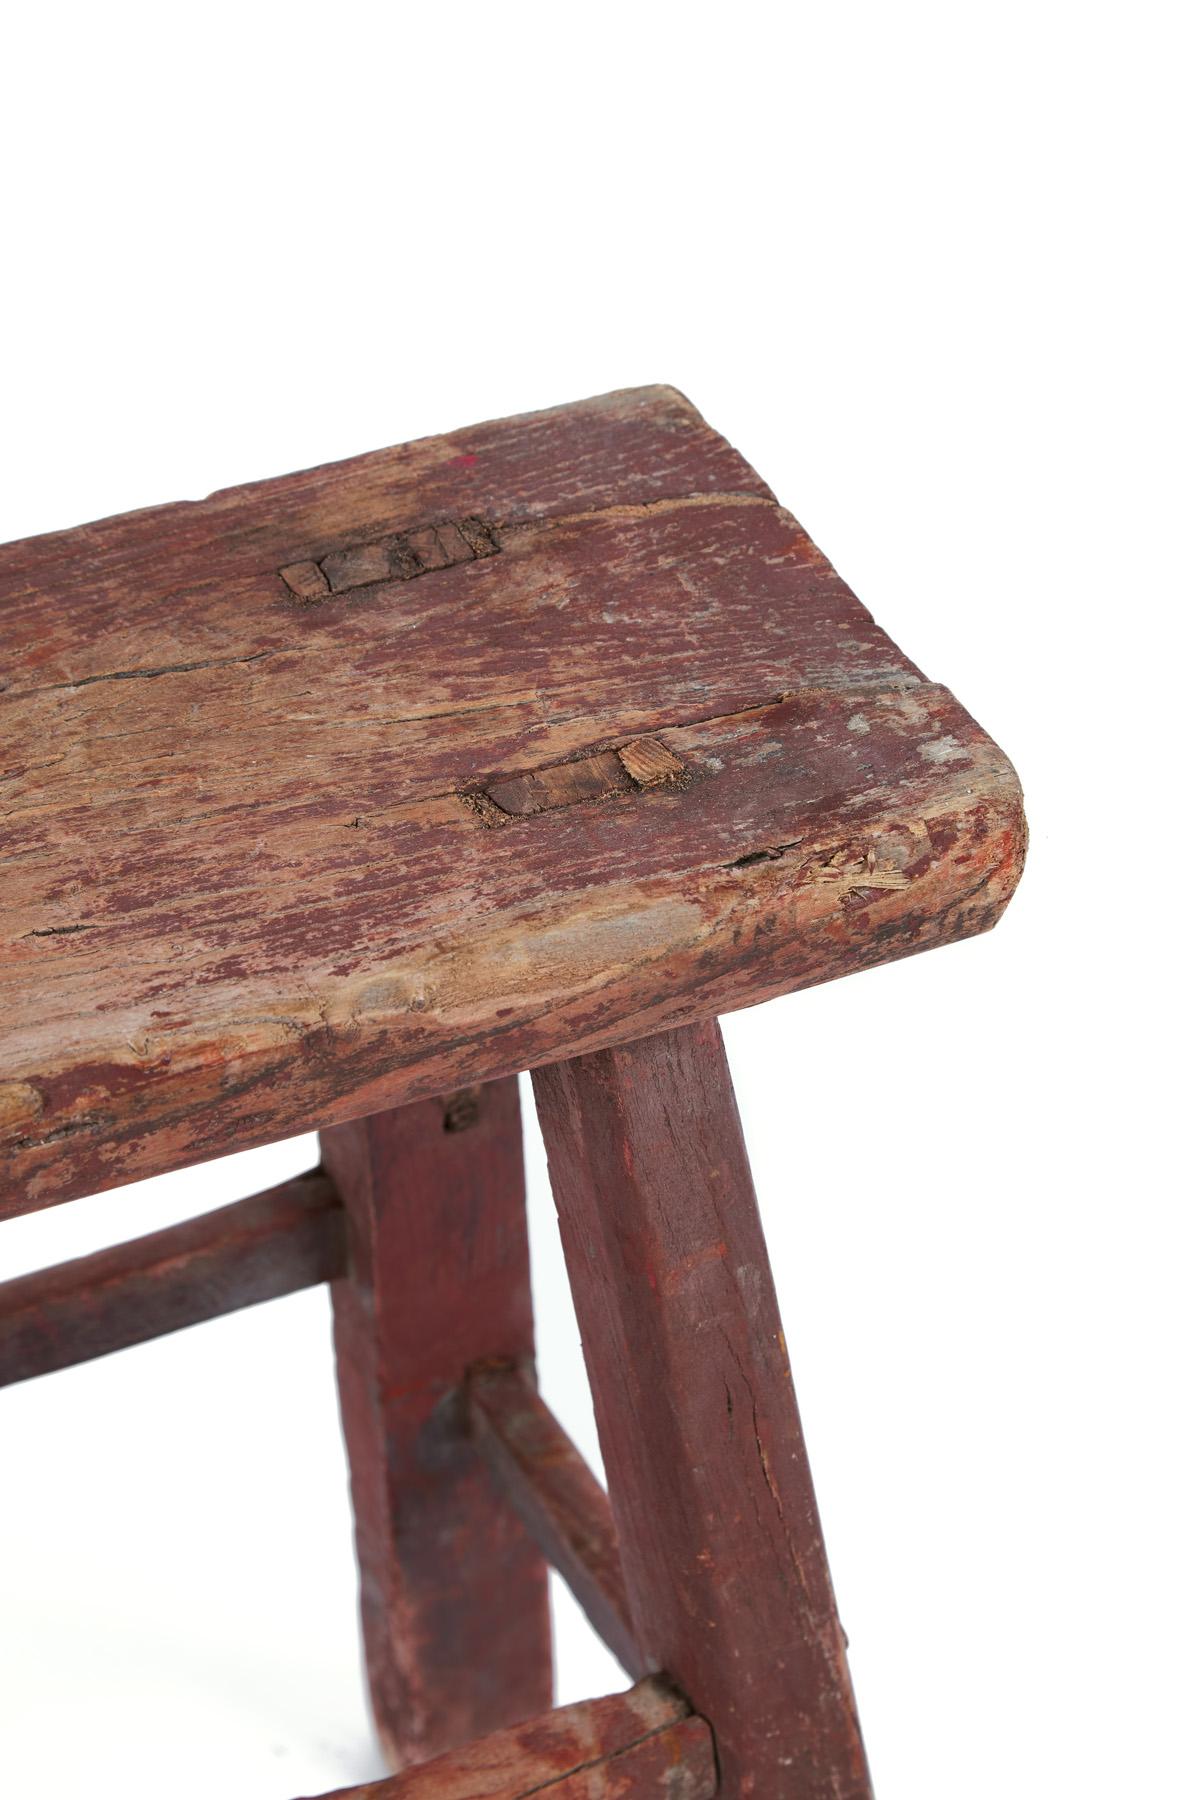 Vintage Italian Wooden Stool In Distressed Condition For Sale In Soho, London, GB